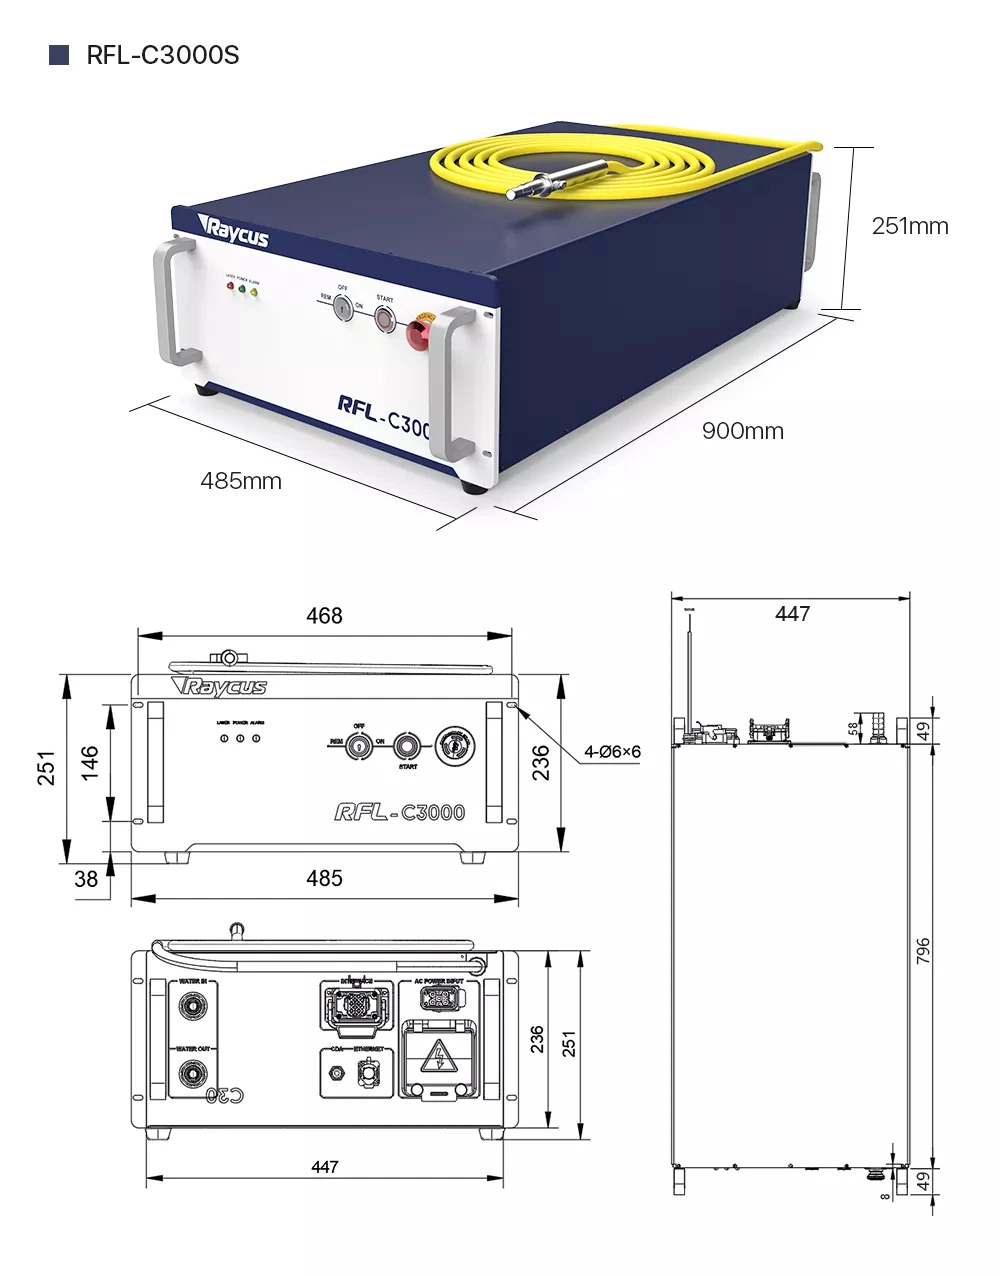 Raycus 3000W Cw Fiber Laser Source for Fiber Laser Cutting Machine with 24 Hour Repair Service